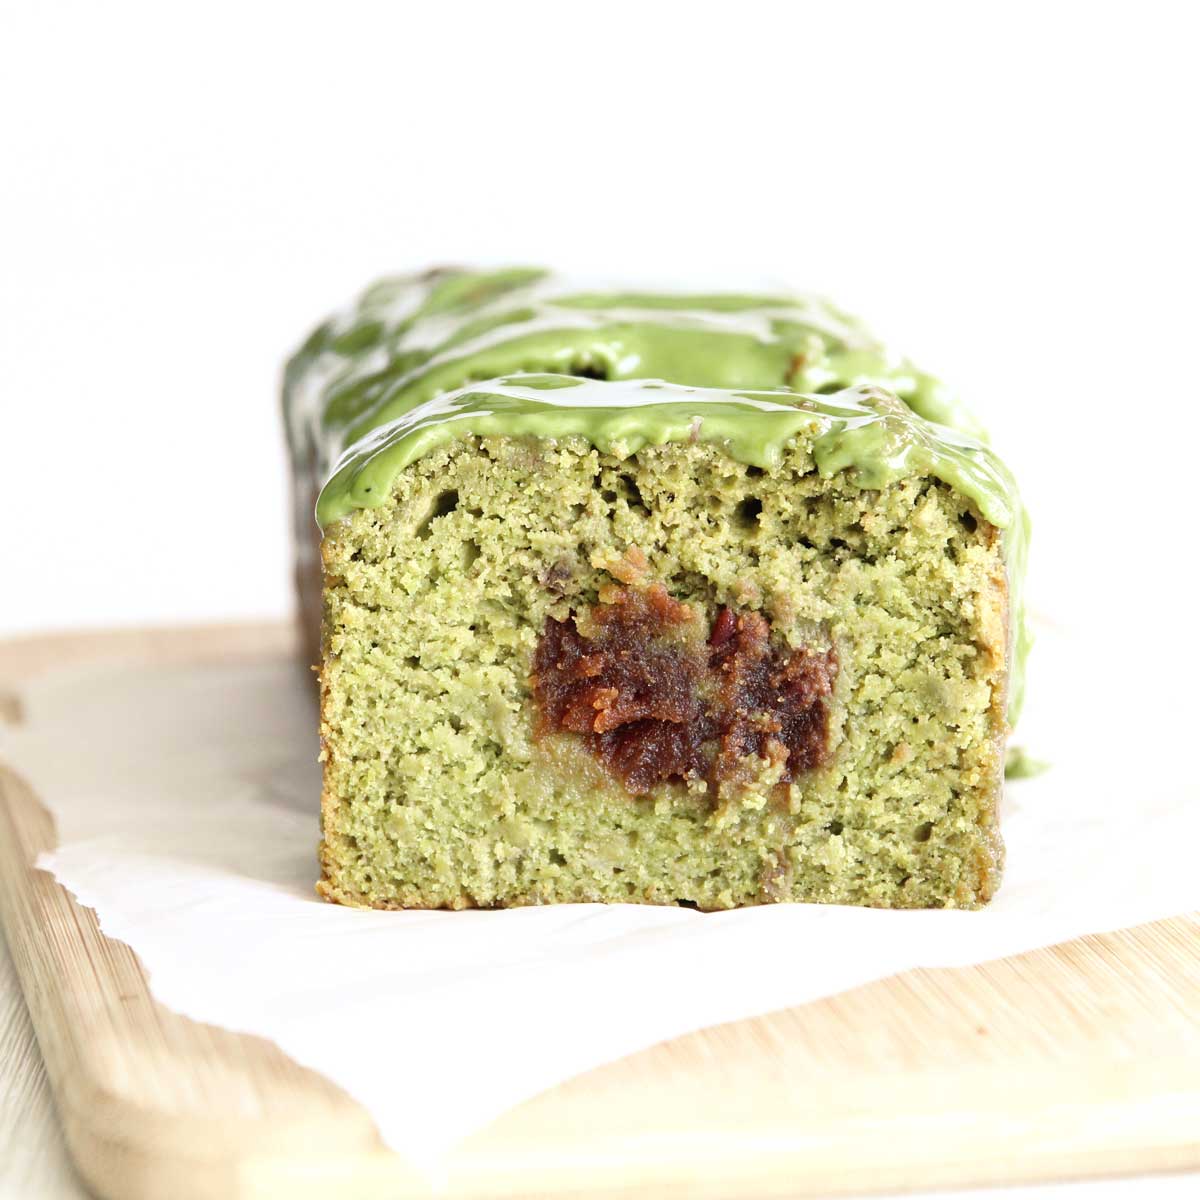 How to Make Matcha Banana Bread with Red Bean Paste Filling - Flourless Banana Roll Cake